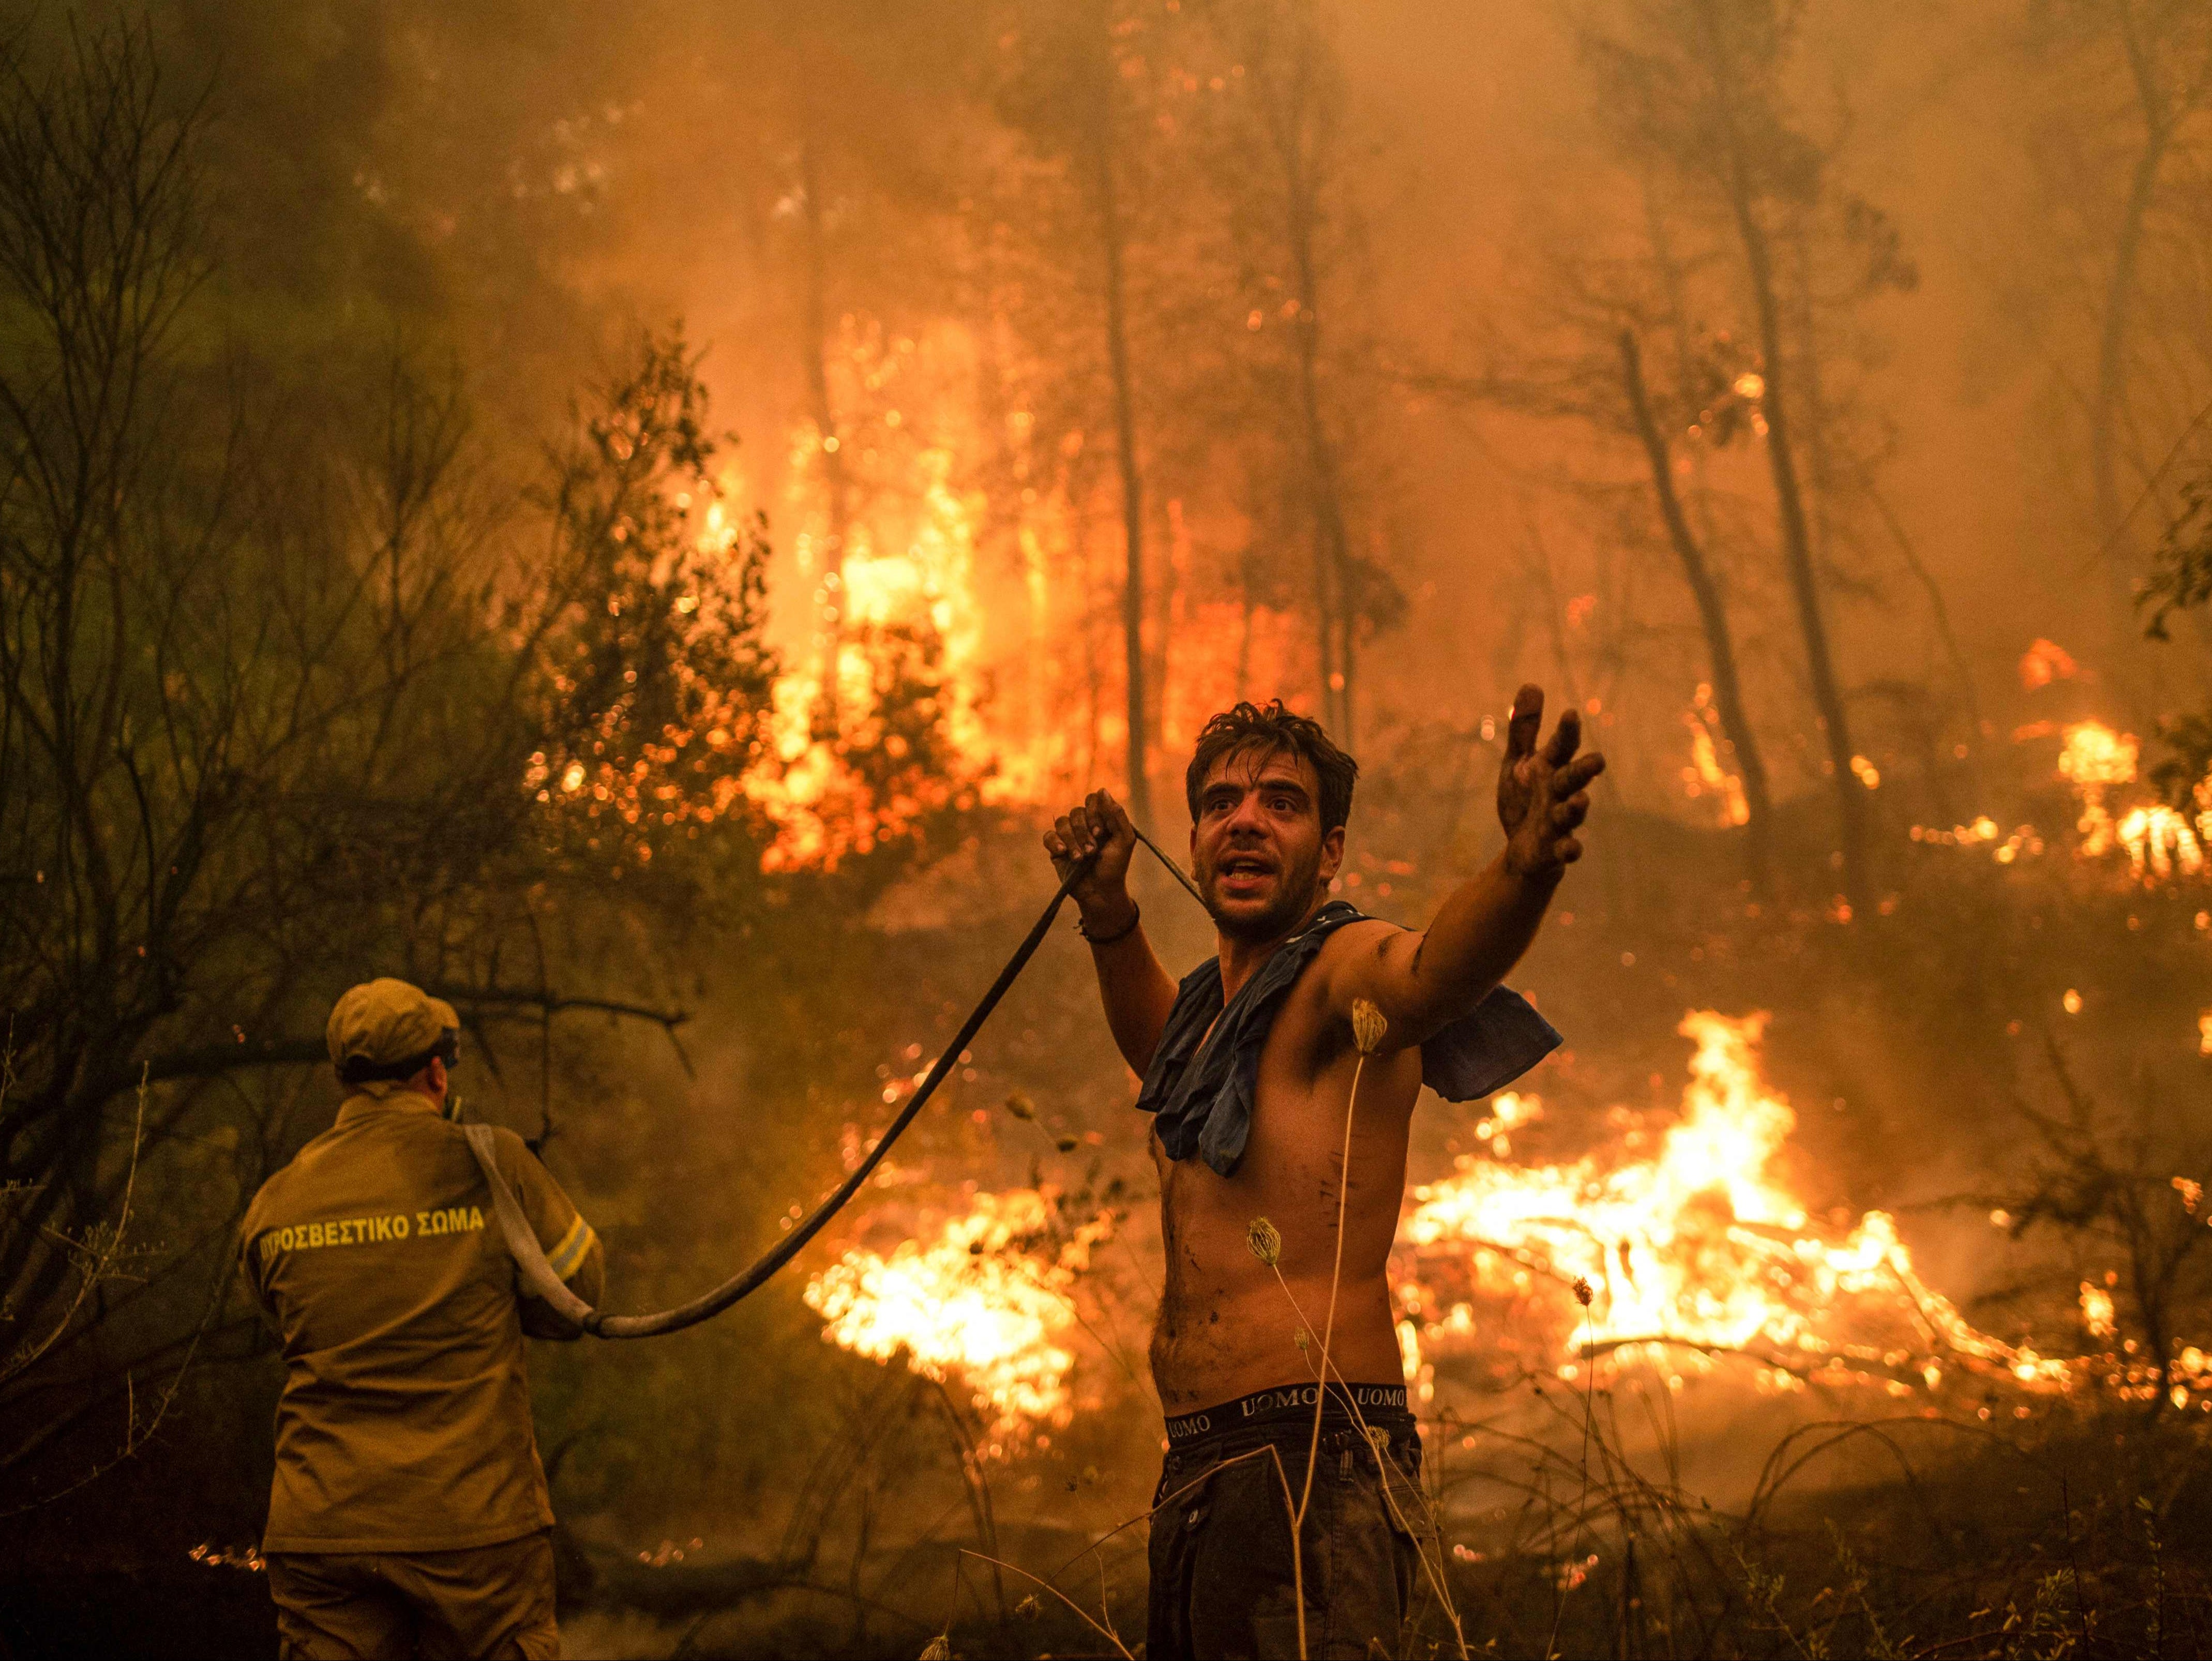 A local resident on the Greek island of Evia holds a water hose during catastrophic wildfires in August